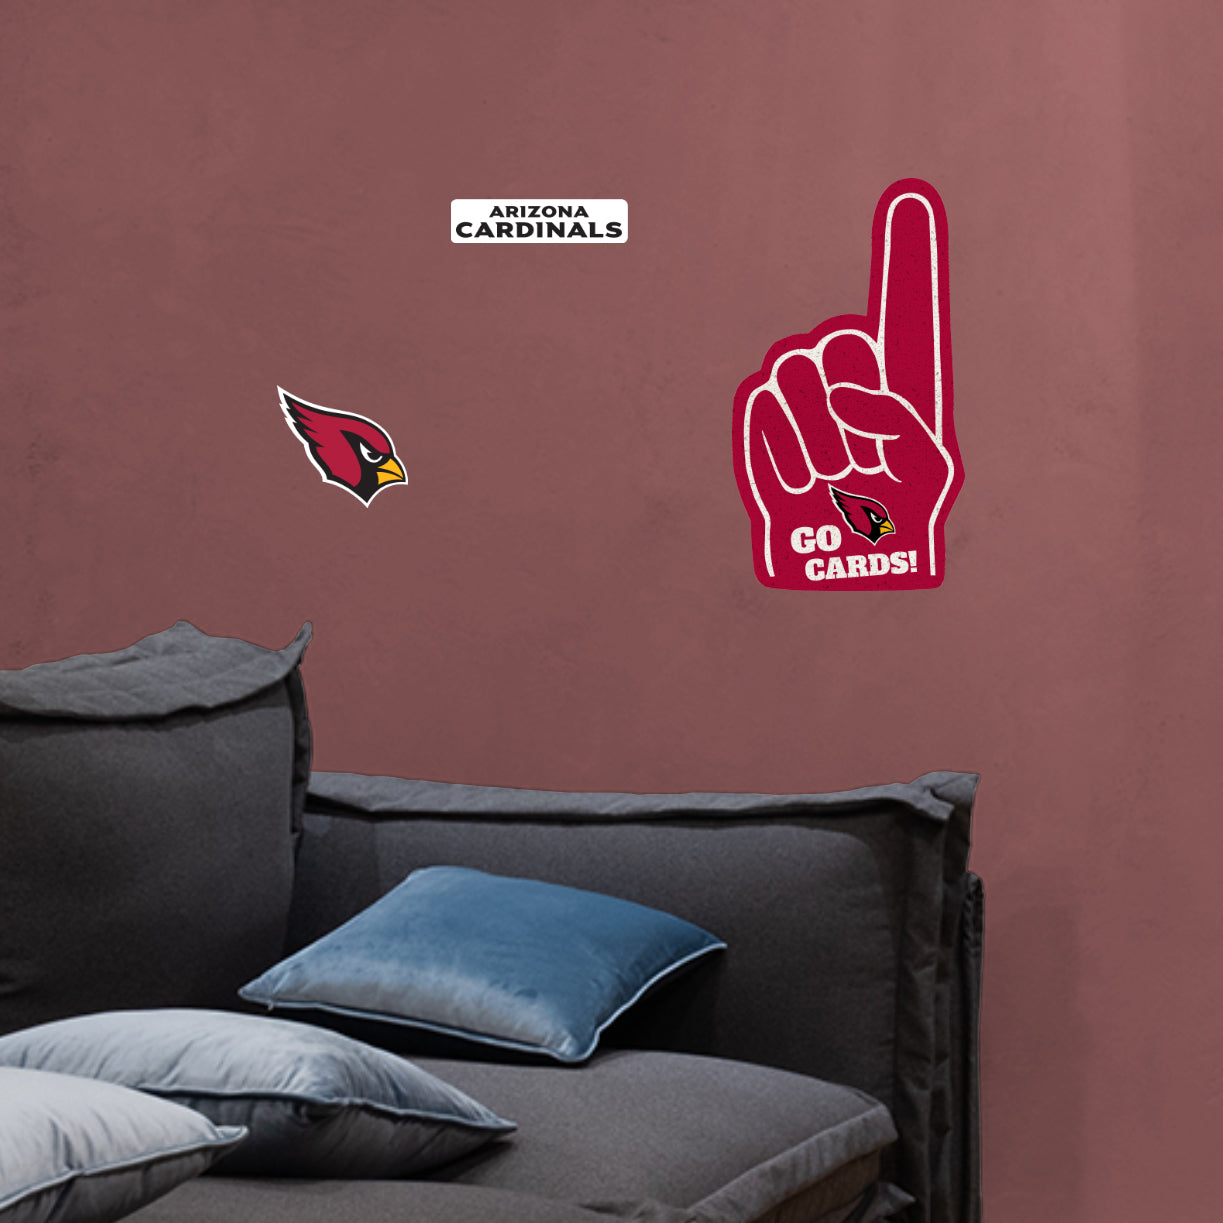 Arizona Cardinals: Foam Finger - Officially Licensed NFL Removable Adhesive Decal